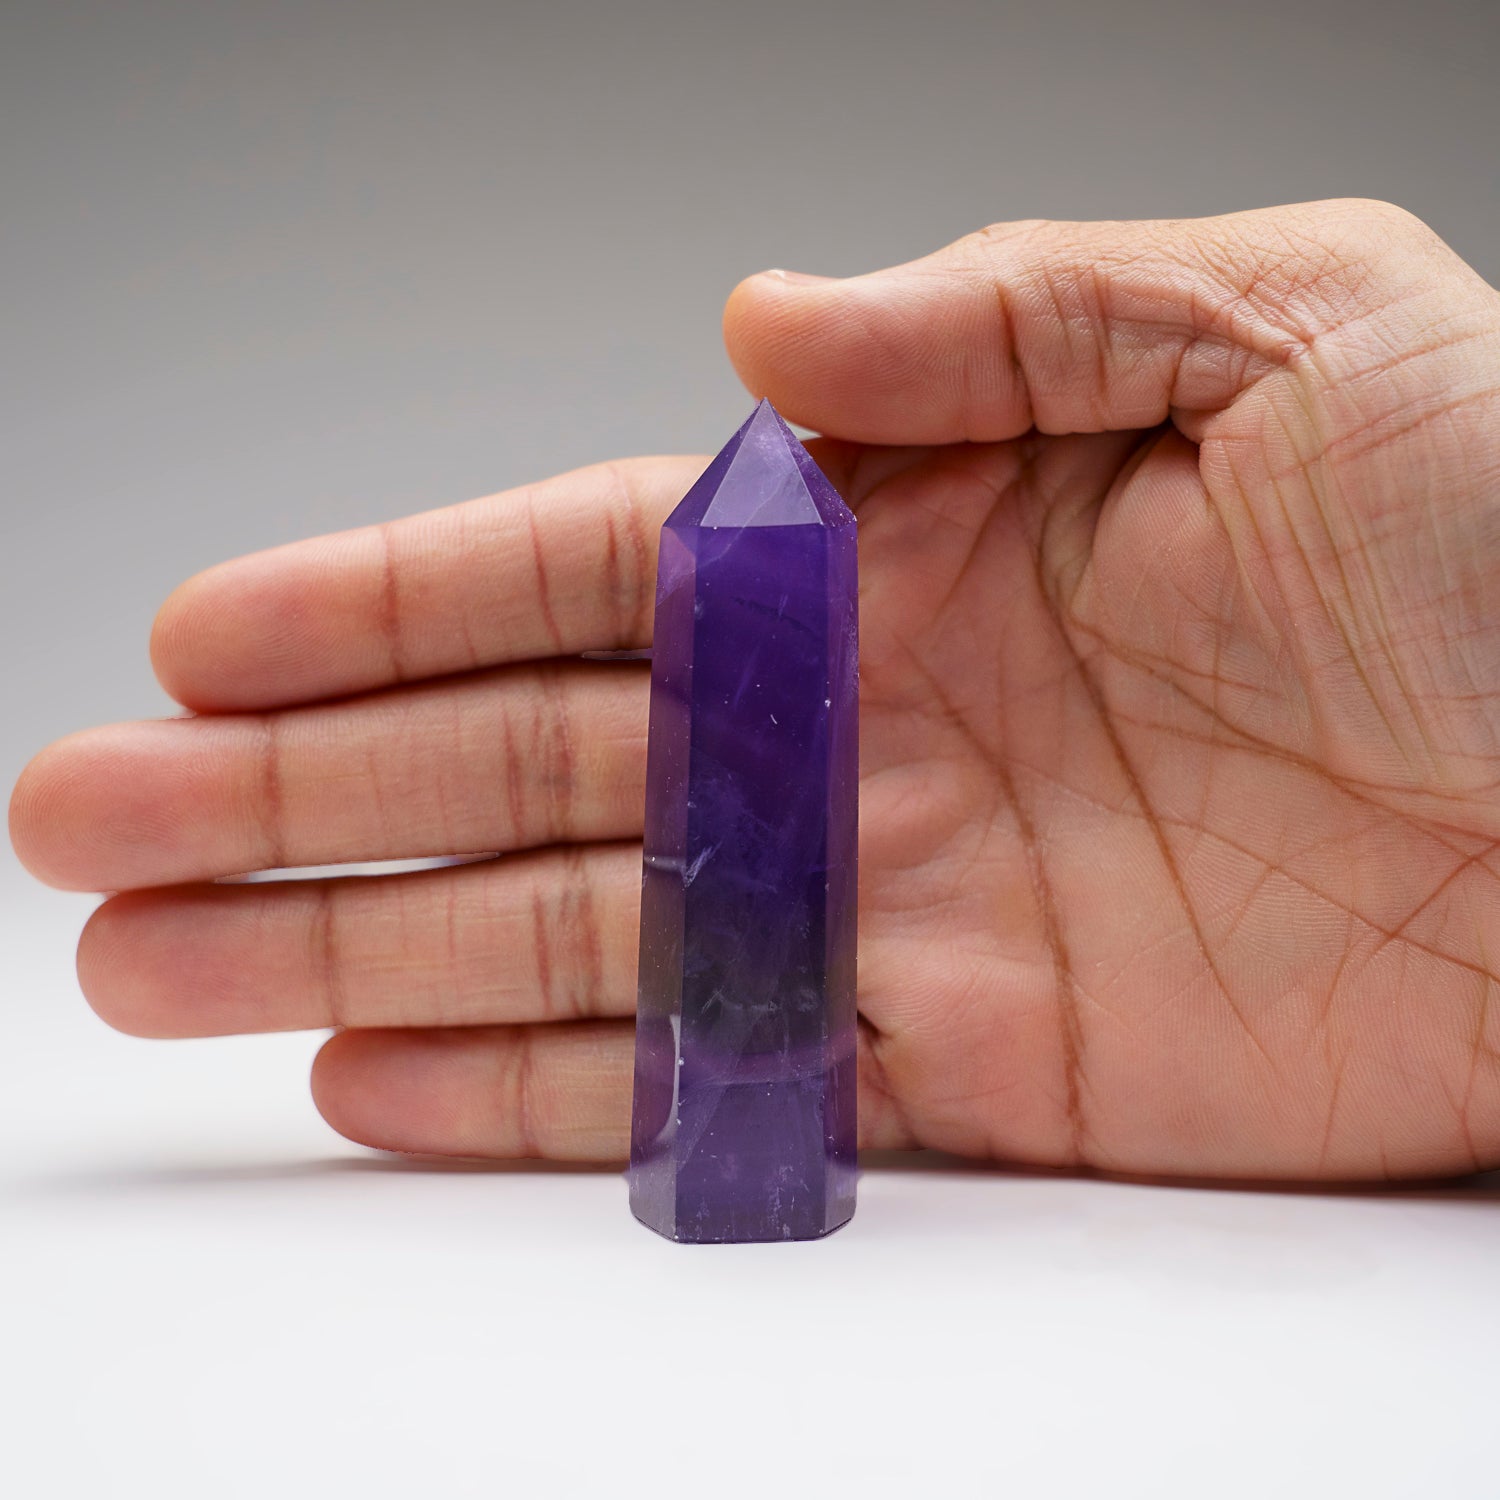 Genuine Polished Purple Fluorite Point from China (80 grams)